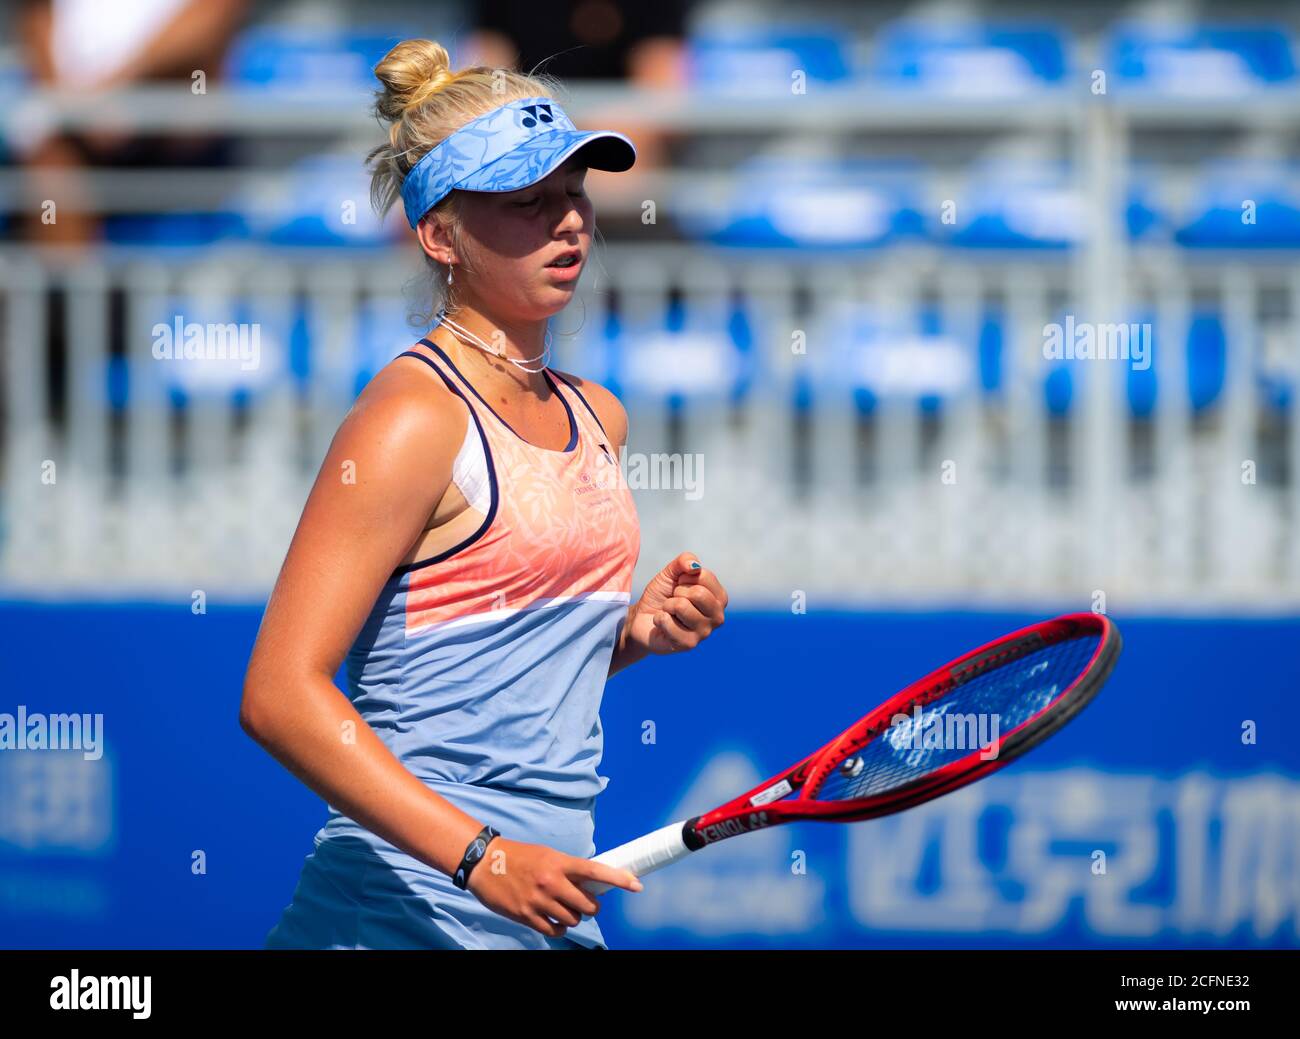 Clara Tauson of Denmark in action during qualifications at the 2019 Dongfeng Motor Wuhan Open Premier 5 tennis tournament Stock Photo